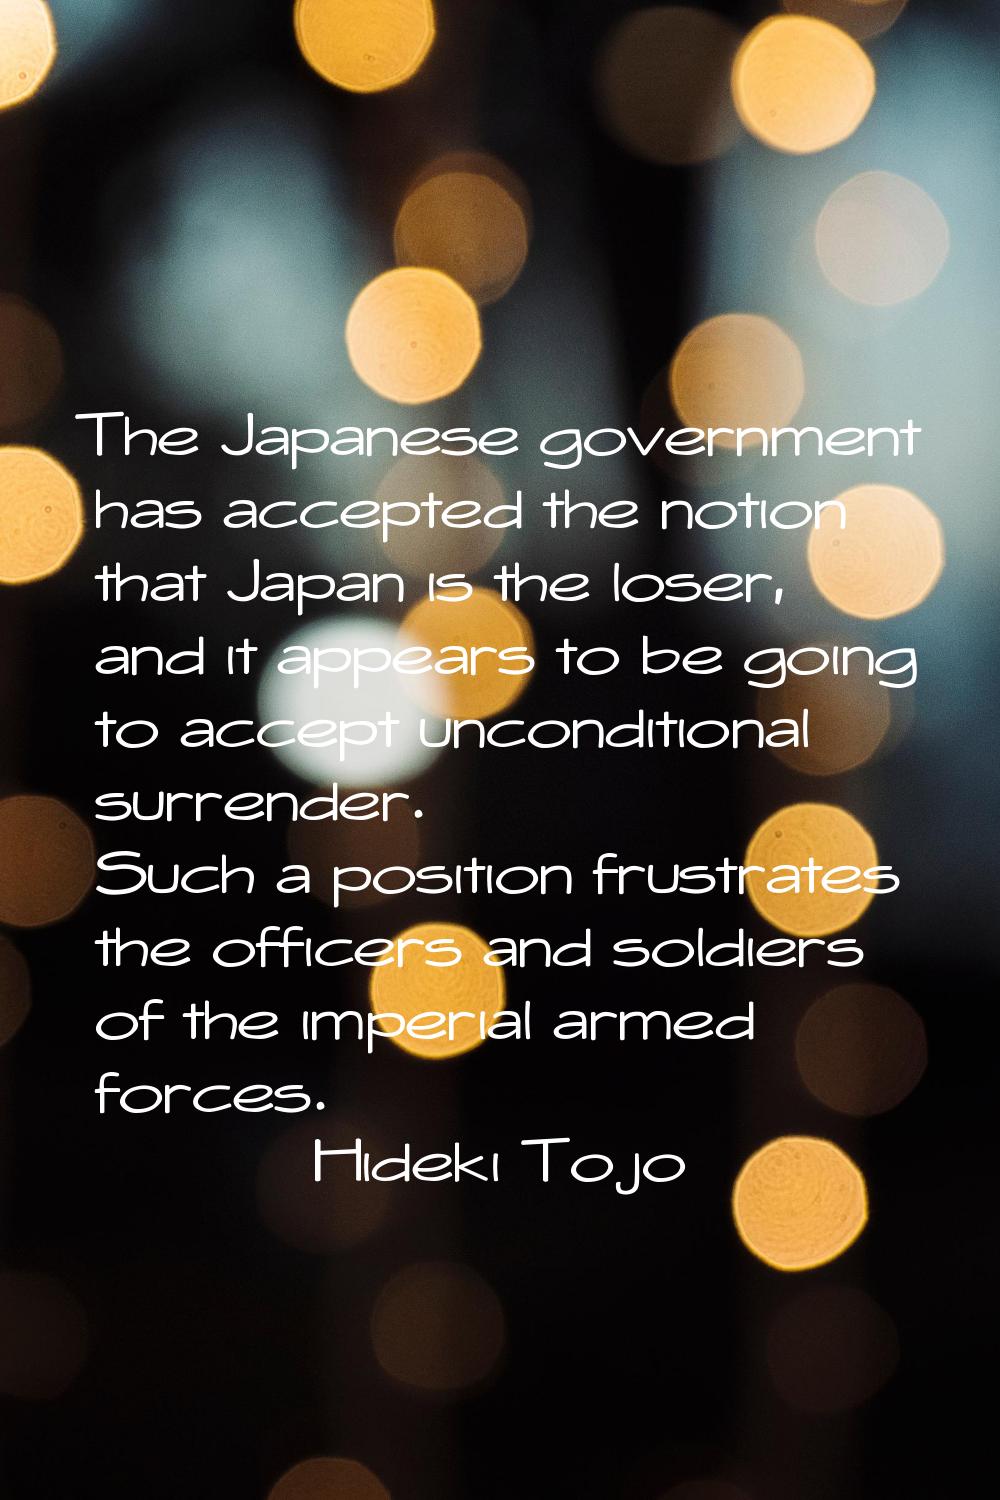 The Japanese government has accepted the notion that Japan is the loser, and it appears to be going